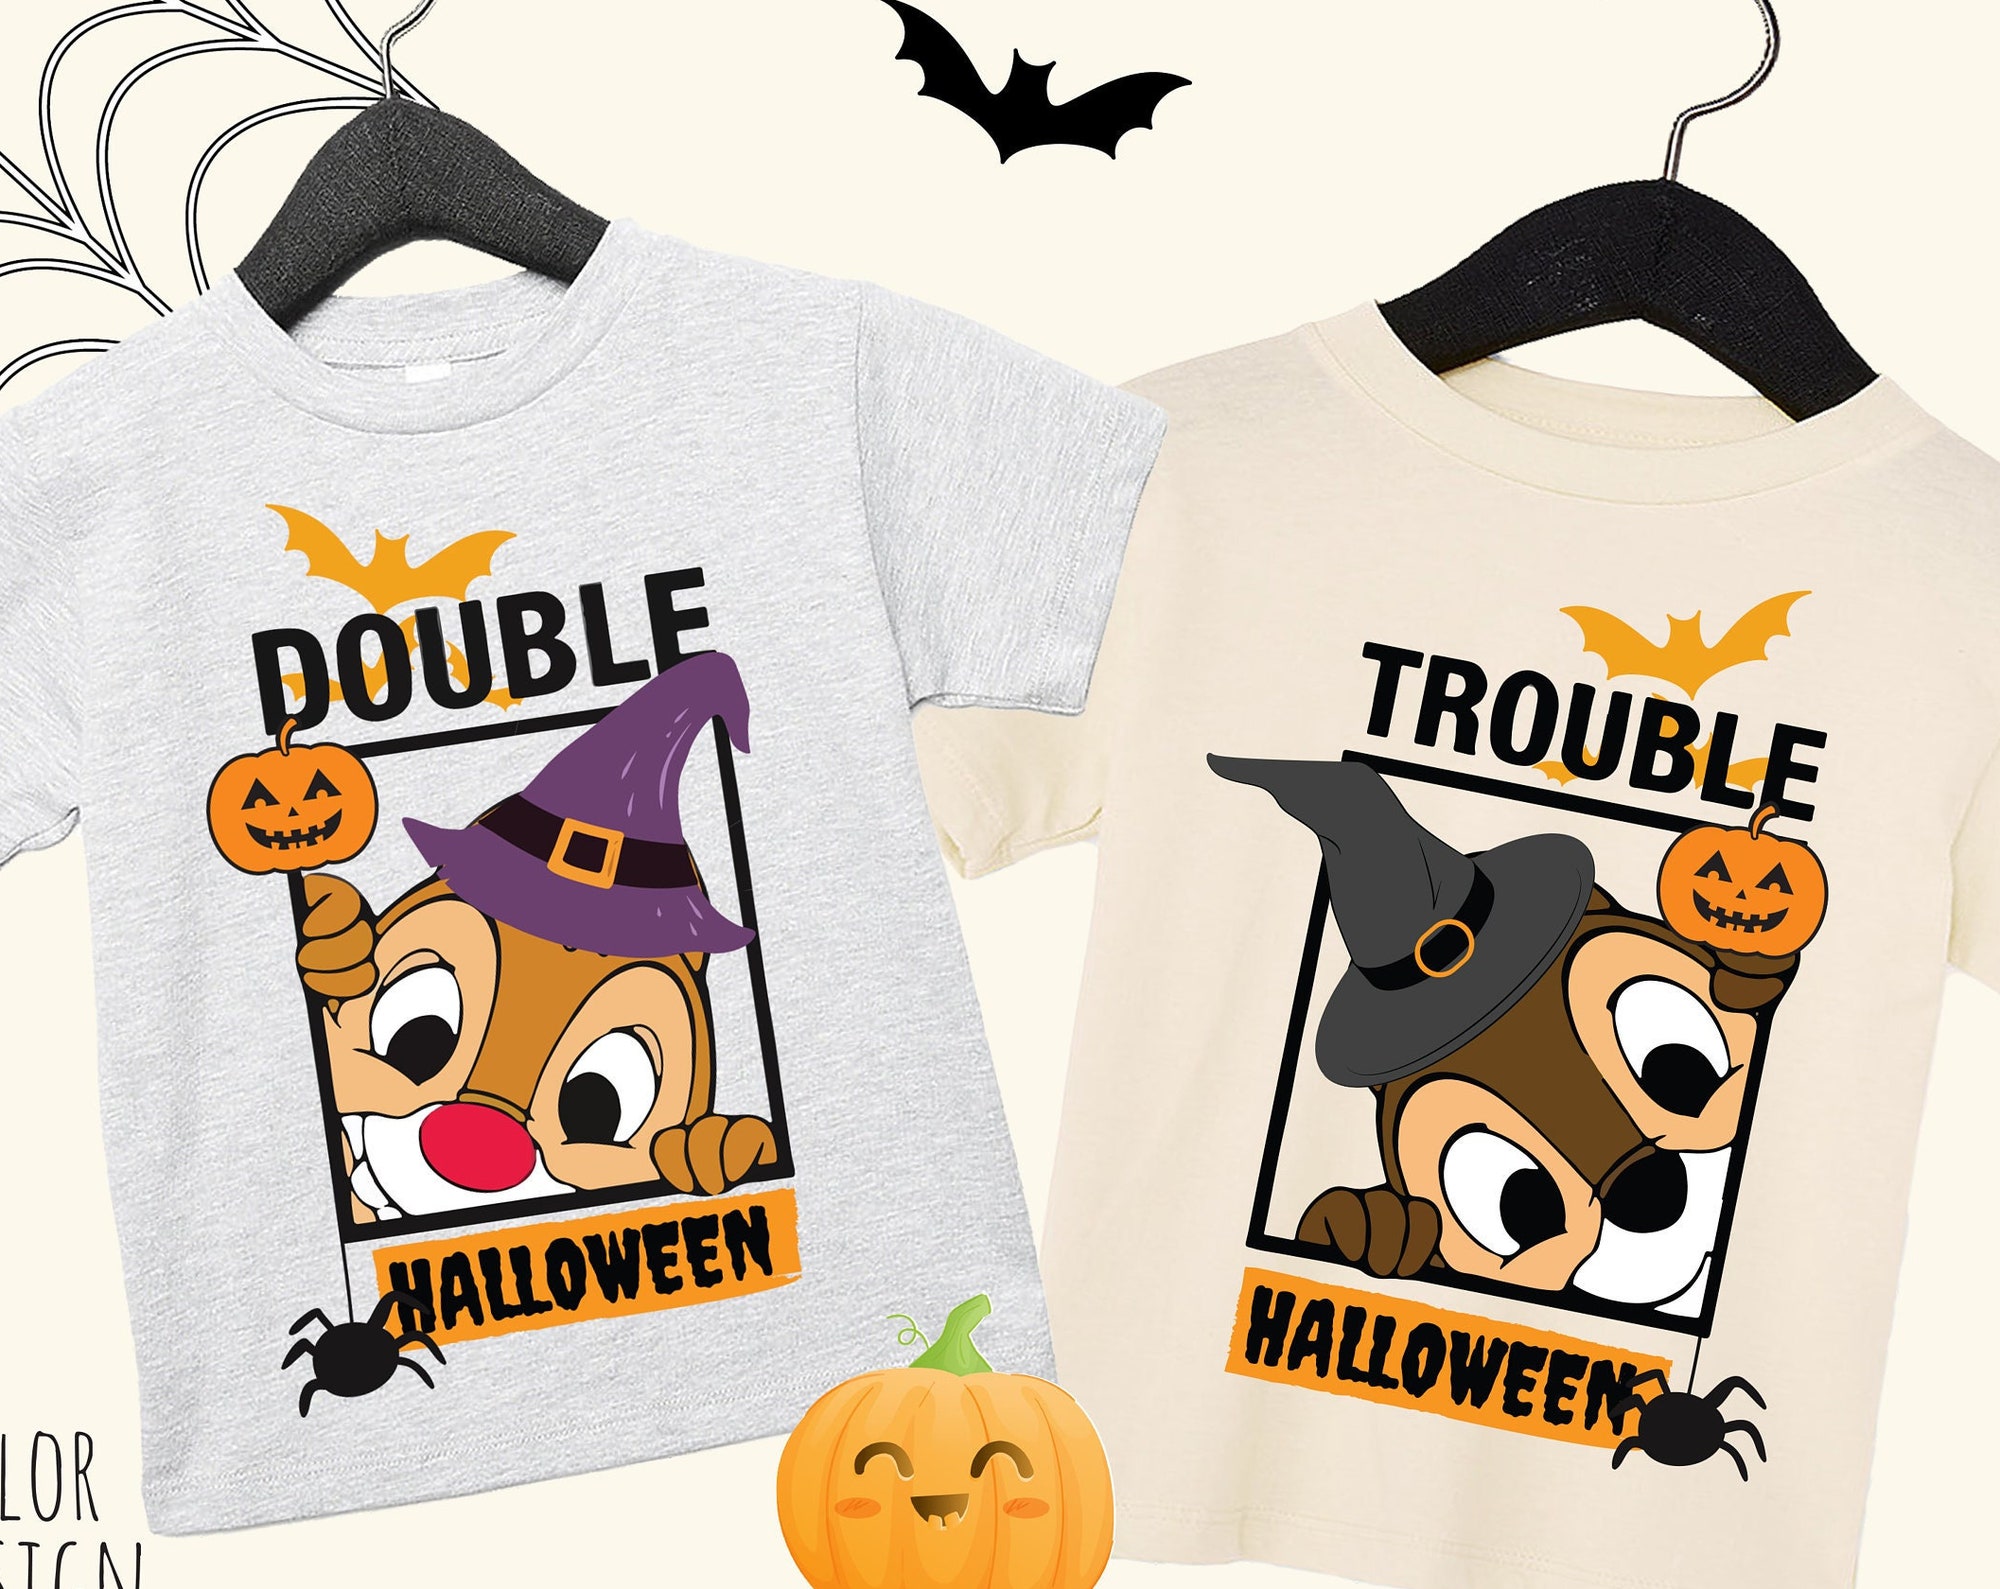 Discover Chip and Dale Halloween shirt, Double Trouble Shirt, Disney Halloween Couple Shirts,  Disney Vacation shirt, Sibling shirt, Brother Shirt